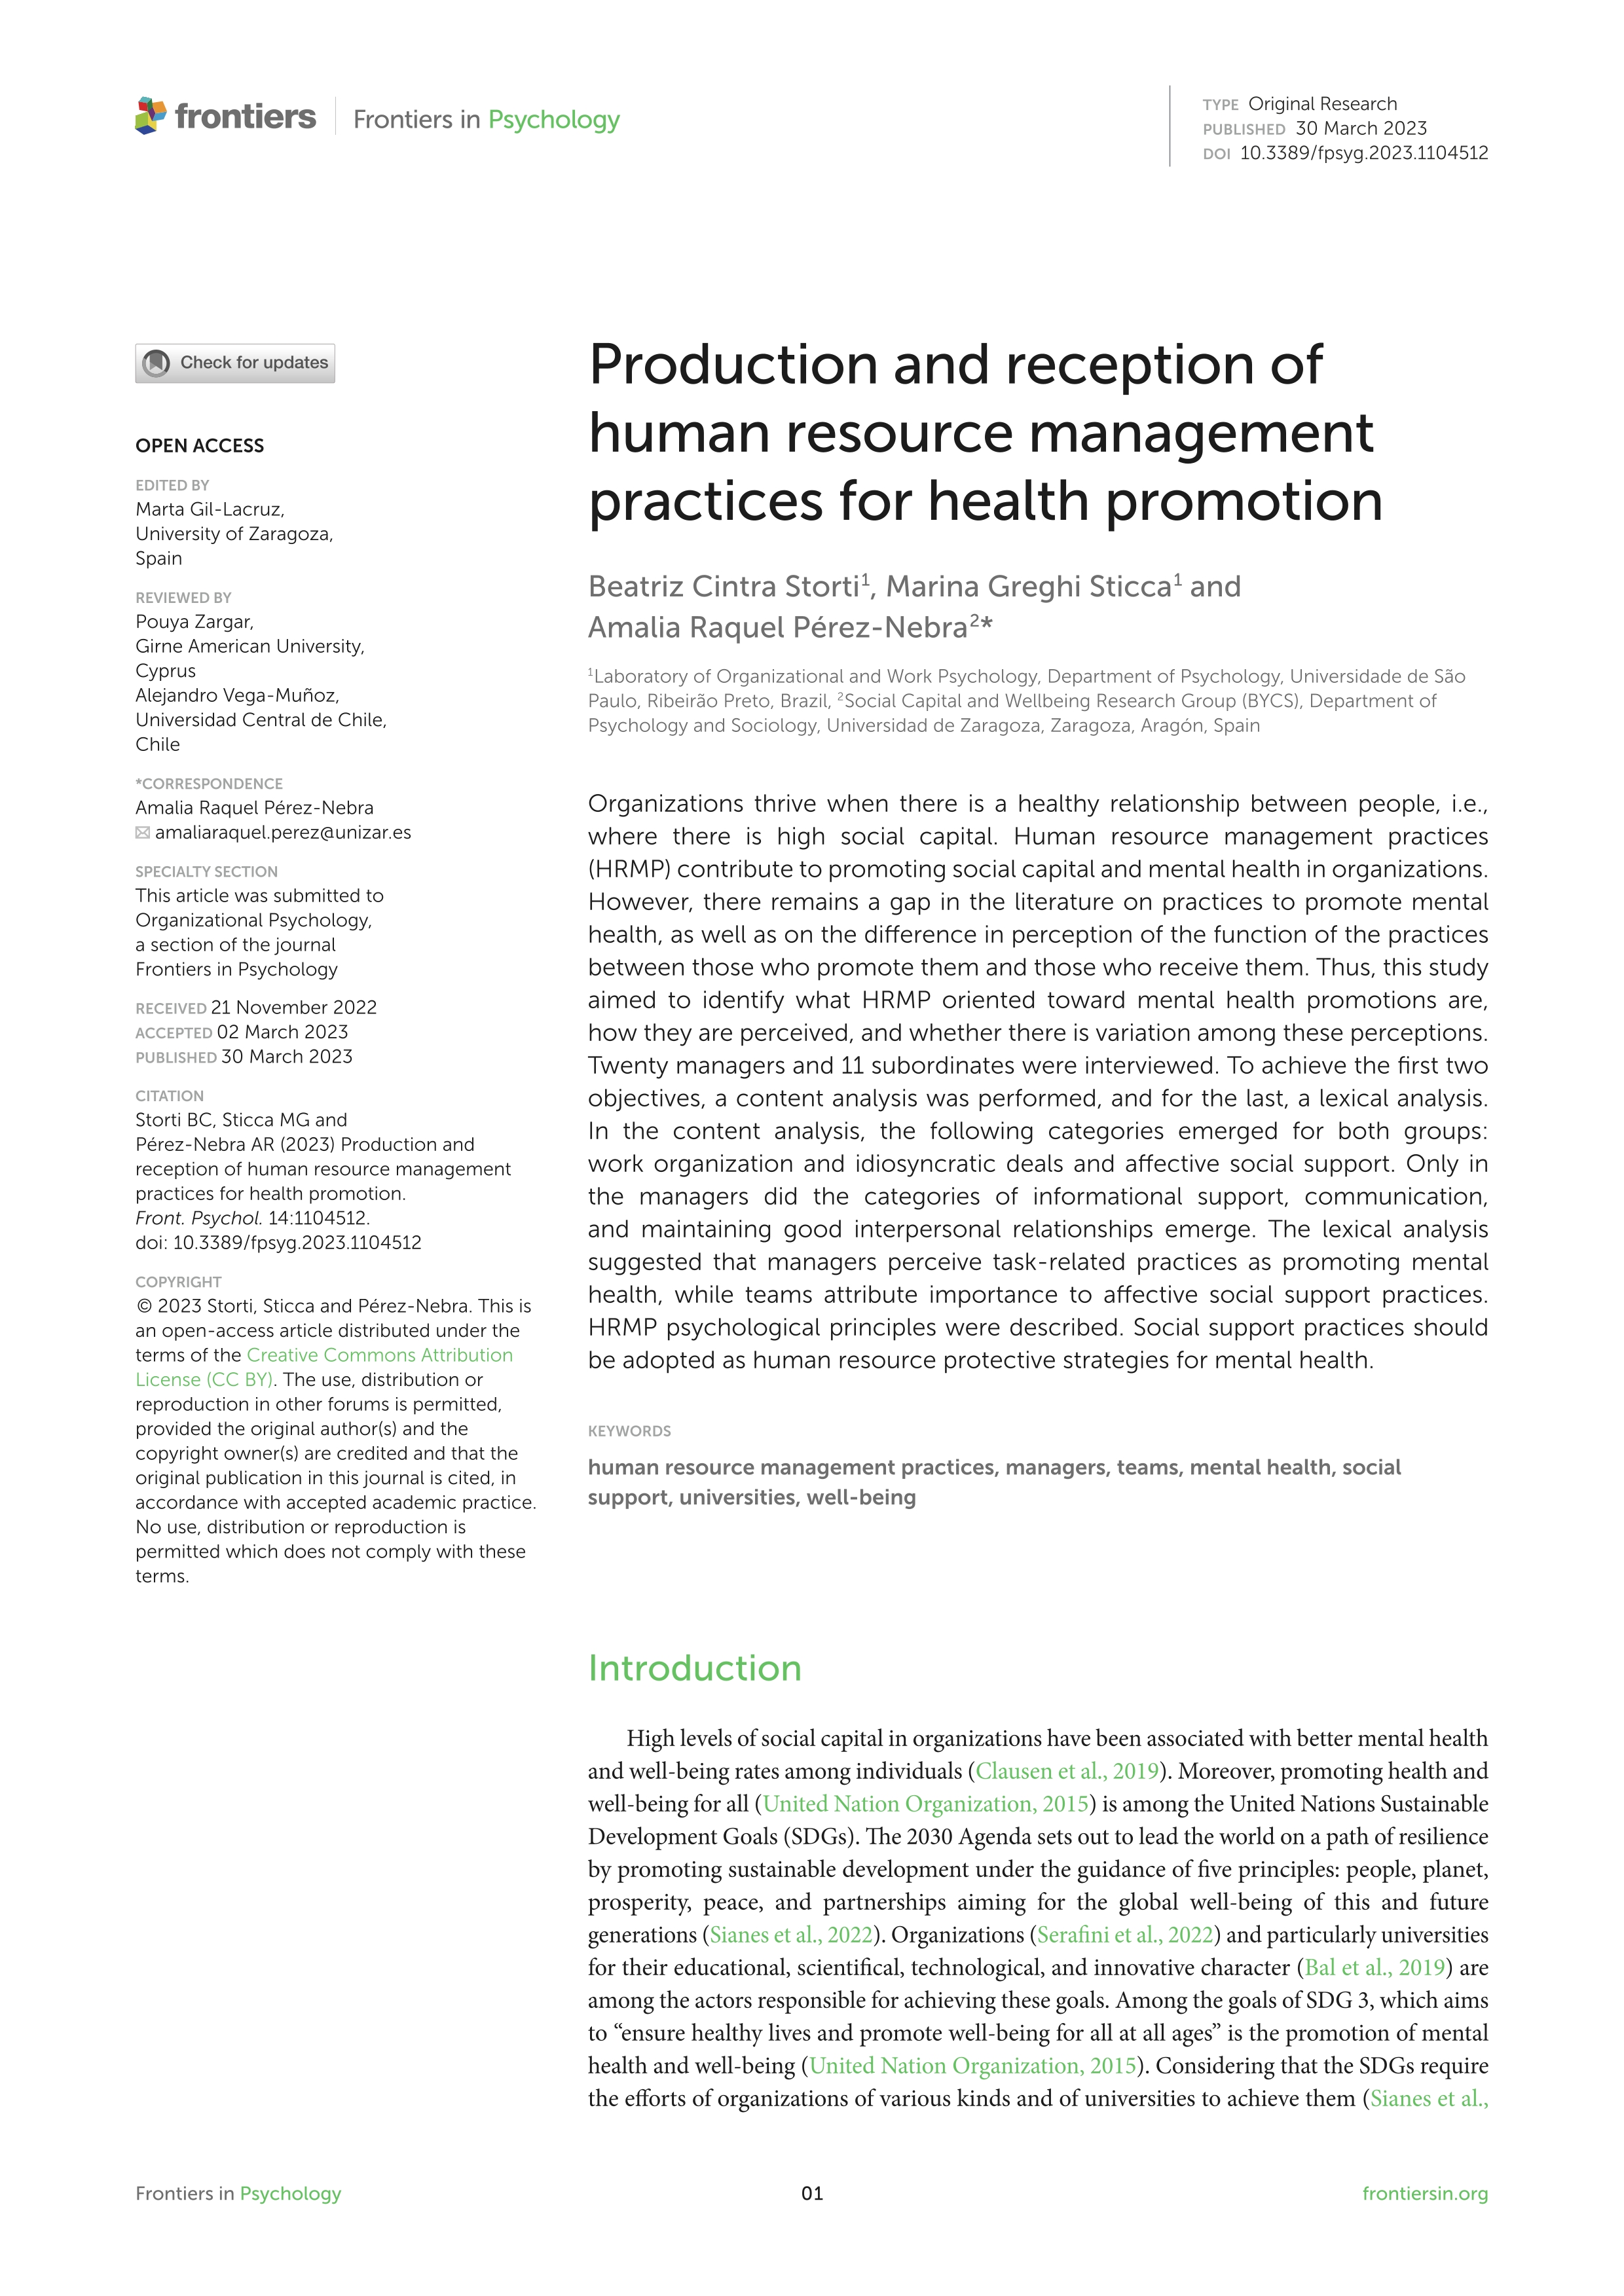 Production and reception of human resource management practices for health promotion